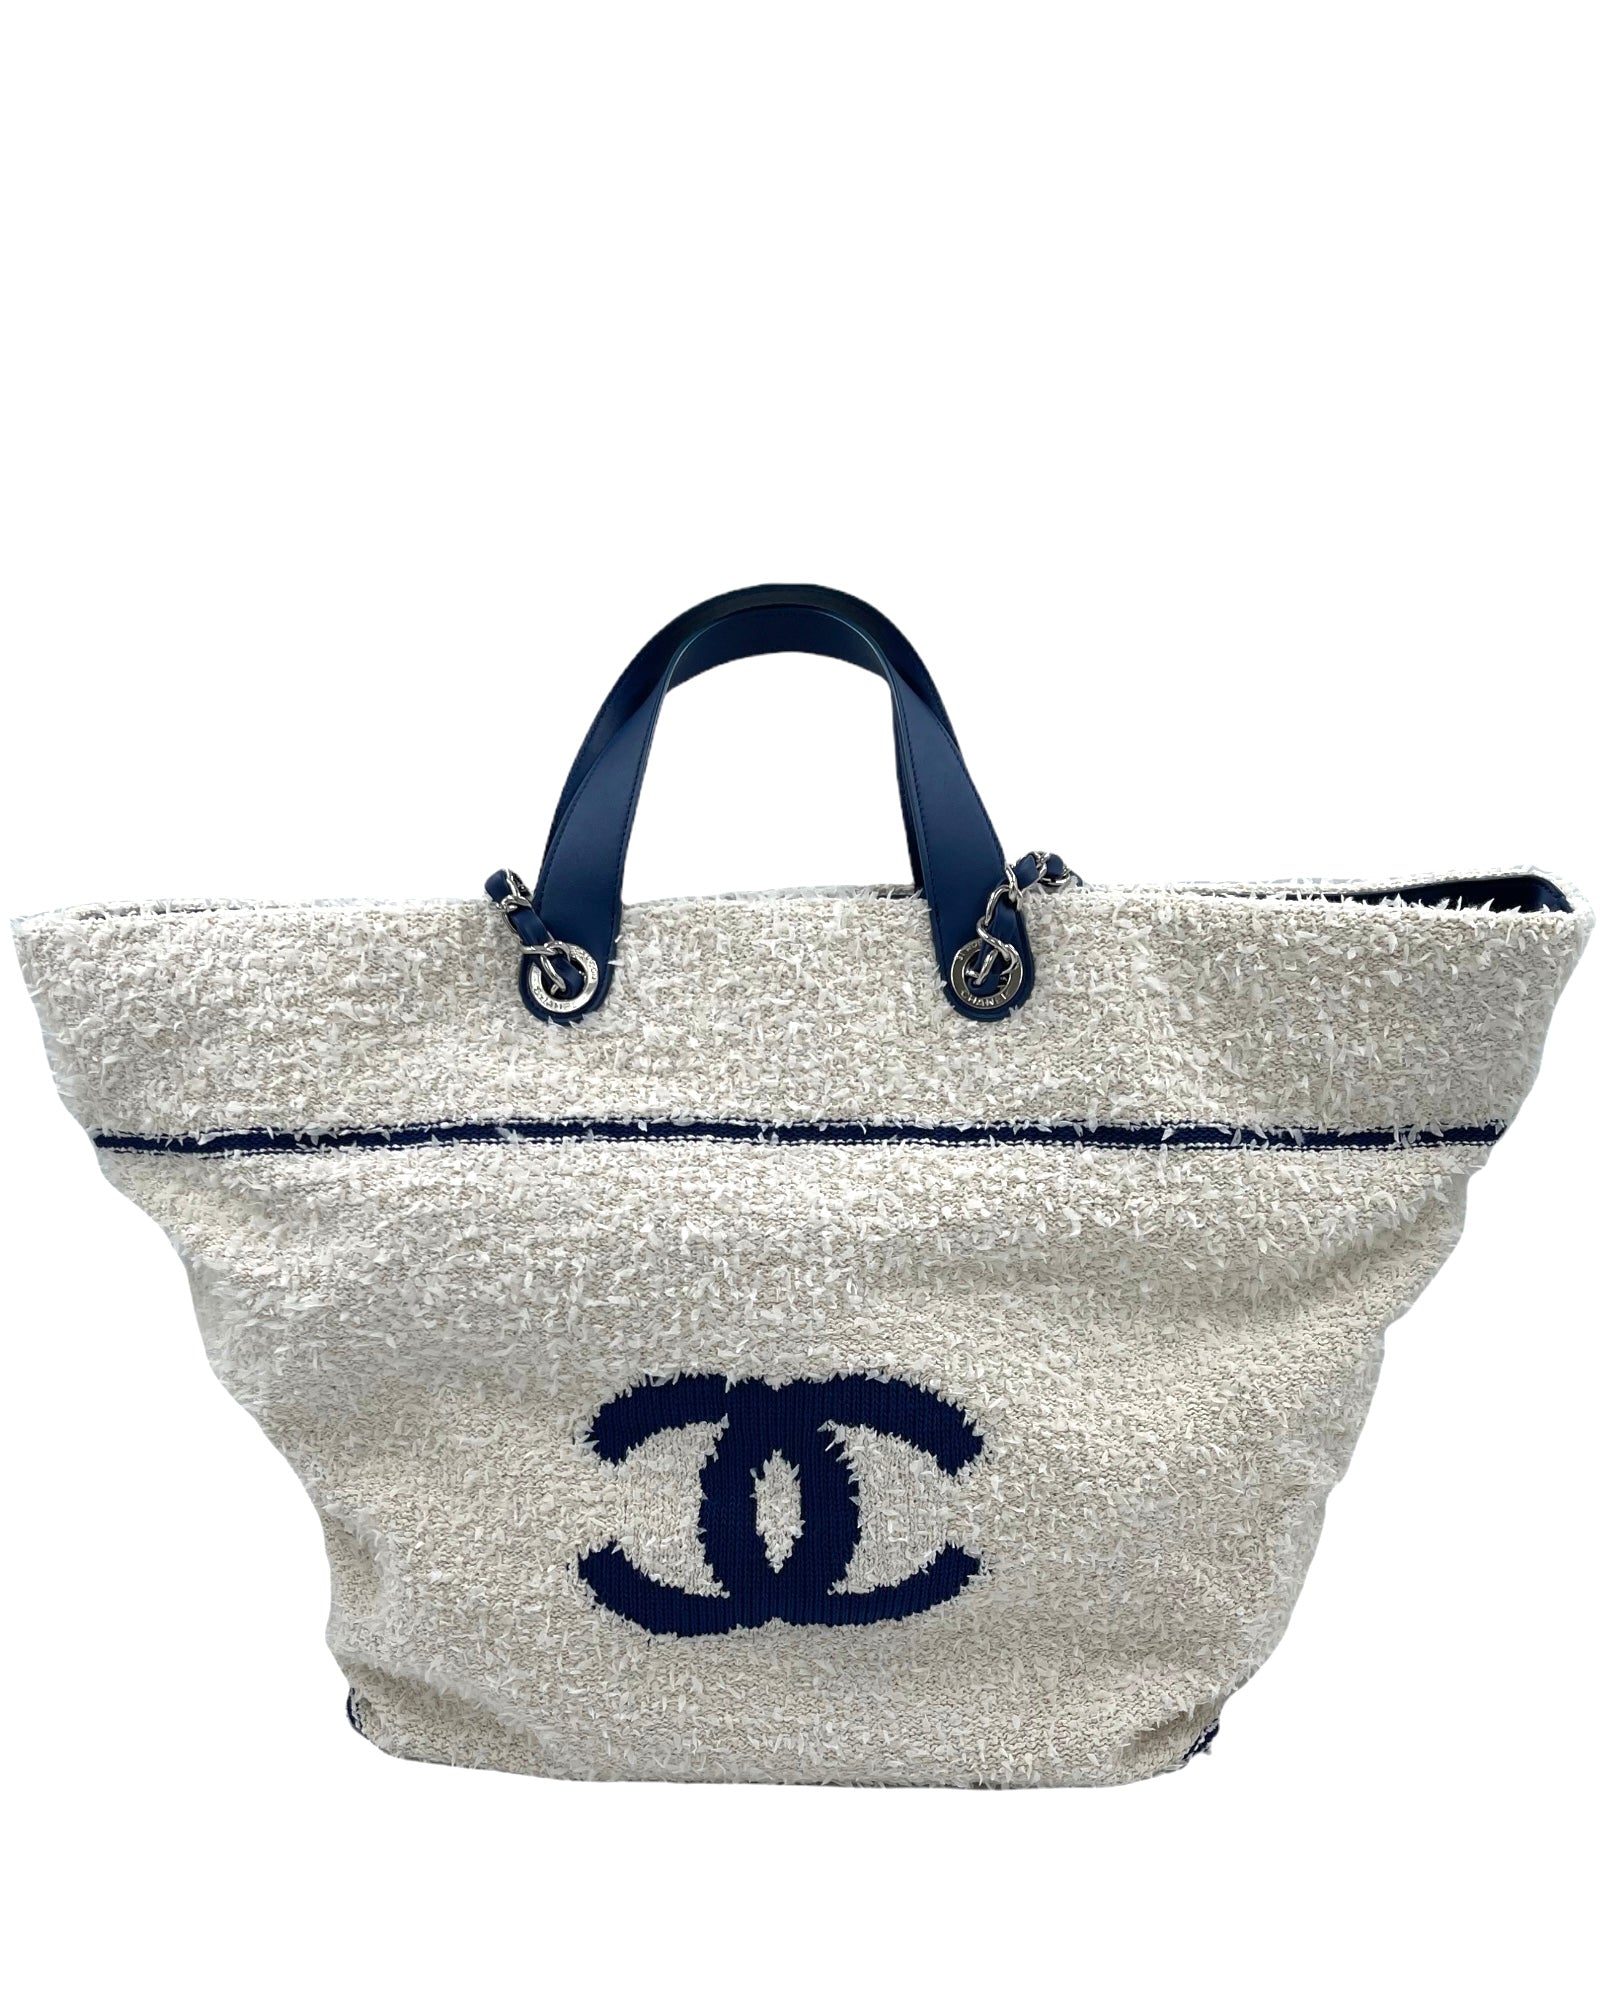 Chanel Deauville Venise Biarritz Shopping Tote Terry Cloth Large